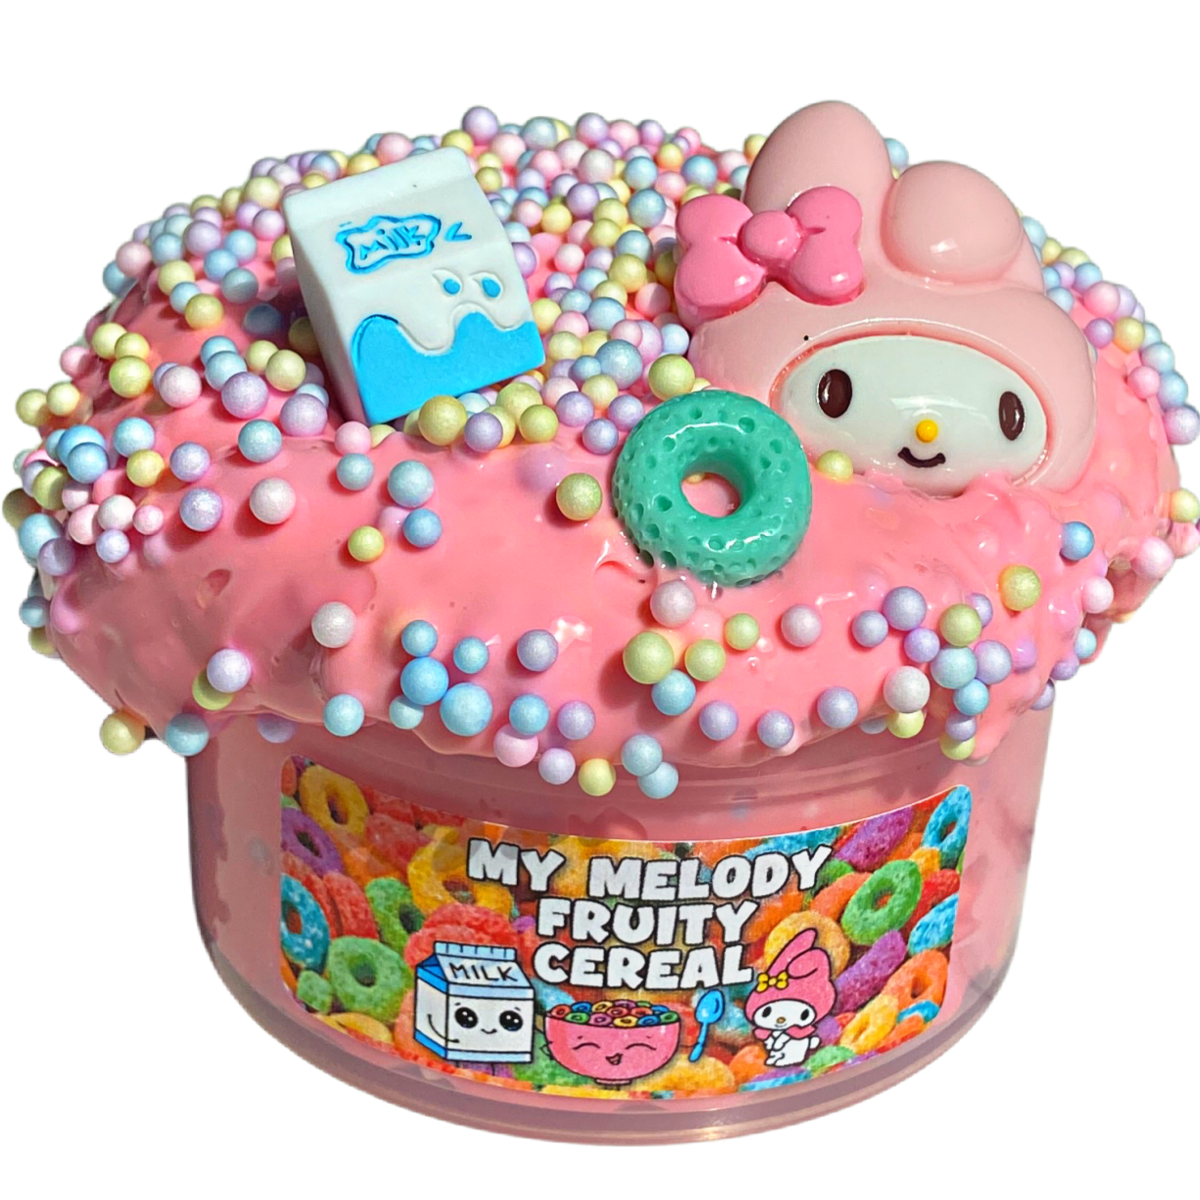 My Melody Fruity Cereal Slime